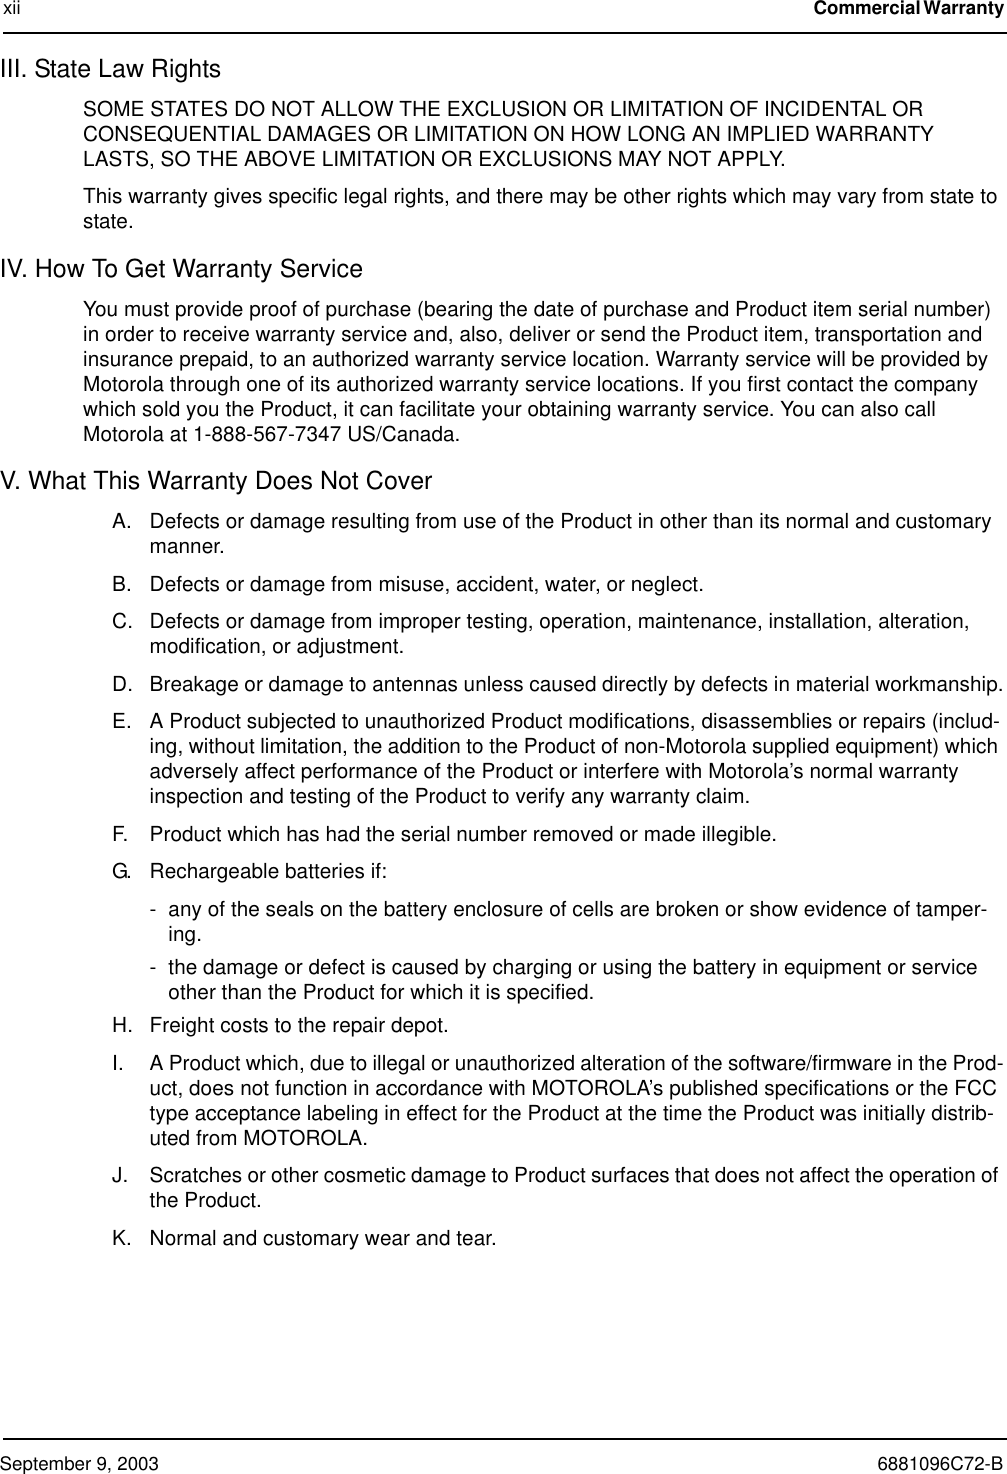 September 9, 2003 6881096C72-Bxii Commercial Warranty III. State Law RightsSOME STATES DO NOT ALLOW THE EXCLUSION OR LIMITATION OF INCIDENTAL OR CONSEQUENTIAL DAMAGES OR LIMITATION ON HOW LONG AN IMPLIED WARRANTY LASTS, SO THE ABOVE LIMITATION OR EXCLUSIONS MAY NOT APPLY.This warranty gives specific legal rights, and there may be other rights which may vary from state to state.IV. How To Get Warranty ServiceYou must provide proof of purchase (bearing the date of purchase and Product item serial number) in order to receive warranty service and, also, deliver or send the Product item, transportation and insurance prepaid, to an authorized warranty service location. Warranty service will be provided by Motorola through one of its authorized warranty service locations. If you first contact the company which sold you the Product, it can facilitate your obtaining warranty service. You can also call Motorola at 1-888-567-7347 US/Canada.V. What This Warranty Does Not CoverA. Defects or damage resulting from use of the Product in other than its normal and customary manner.B. Defects or damage from misuse, accident, water, or neglect.C. Defects or damage from improper testing, operation, maintenance, installation, alteration, modification, or adjustment.D. Breakage or damage to antennas unless caused directly by defects in material workmanship.E. A Product subjected to unauthorized Product modifications, disassemblies or repairs (includ-ing, without limitation, the addition to the Product of non-Motorola supplied equipment) which adversely affect performance of the Product or interfere with Motorola’s normal warranty inspection and testing of the Product to verify any warranty claim.F. Product which has had the serial number removed or made illegible.G. Rechargeable batteries if:- any of the seals on the battery enclosure of cells are broken or show evidence of tamper-ing.- the damage or defect is caused by charging or using the battery in equipment or service other than the Product for which it is specified.H. Freight costs to the repair depot.I. A Product which, due to illegal or unauthorized alteration of the software/firmware in the Prod-uct, does not function in accordance with MOTOROLA’s published specifications or the FCC type acceptance labeling in effect for the Product at the time the Product was initially distrib-uted from MOTOROLA.J. Scratches or other cosmetic damage to Product surfaces that does not affect the operation of the Product.K. Normal and customary wear and tear.